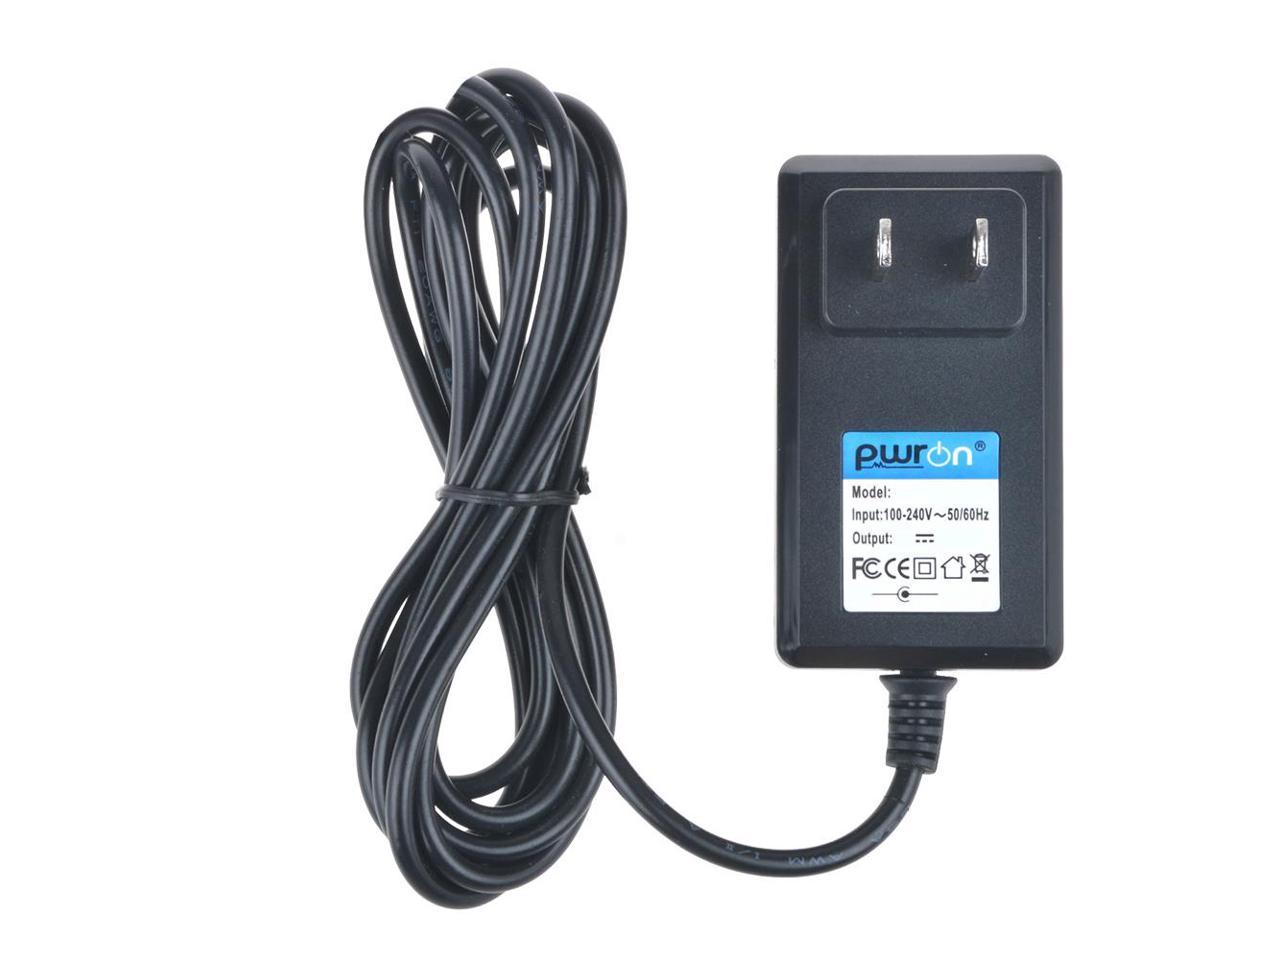 2.5mm AC Home Wall Power Charger Adapter For Kurio 7 Kids Tablet PN#96000 